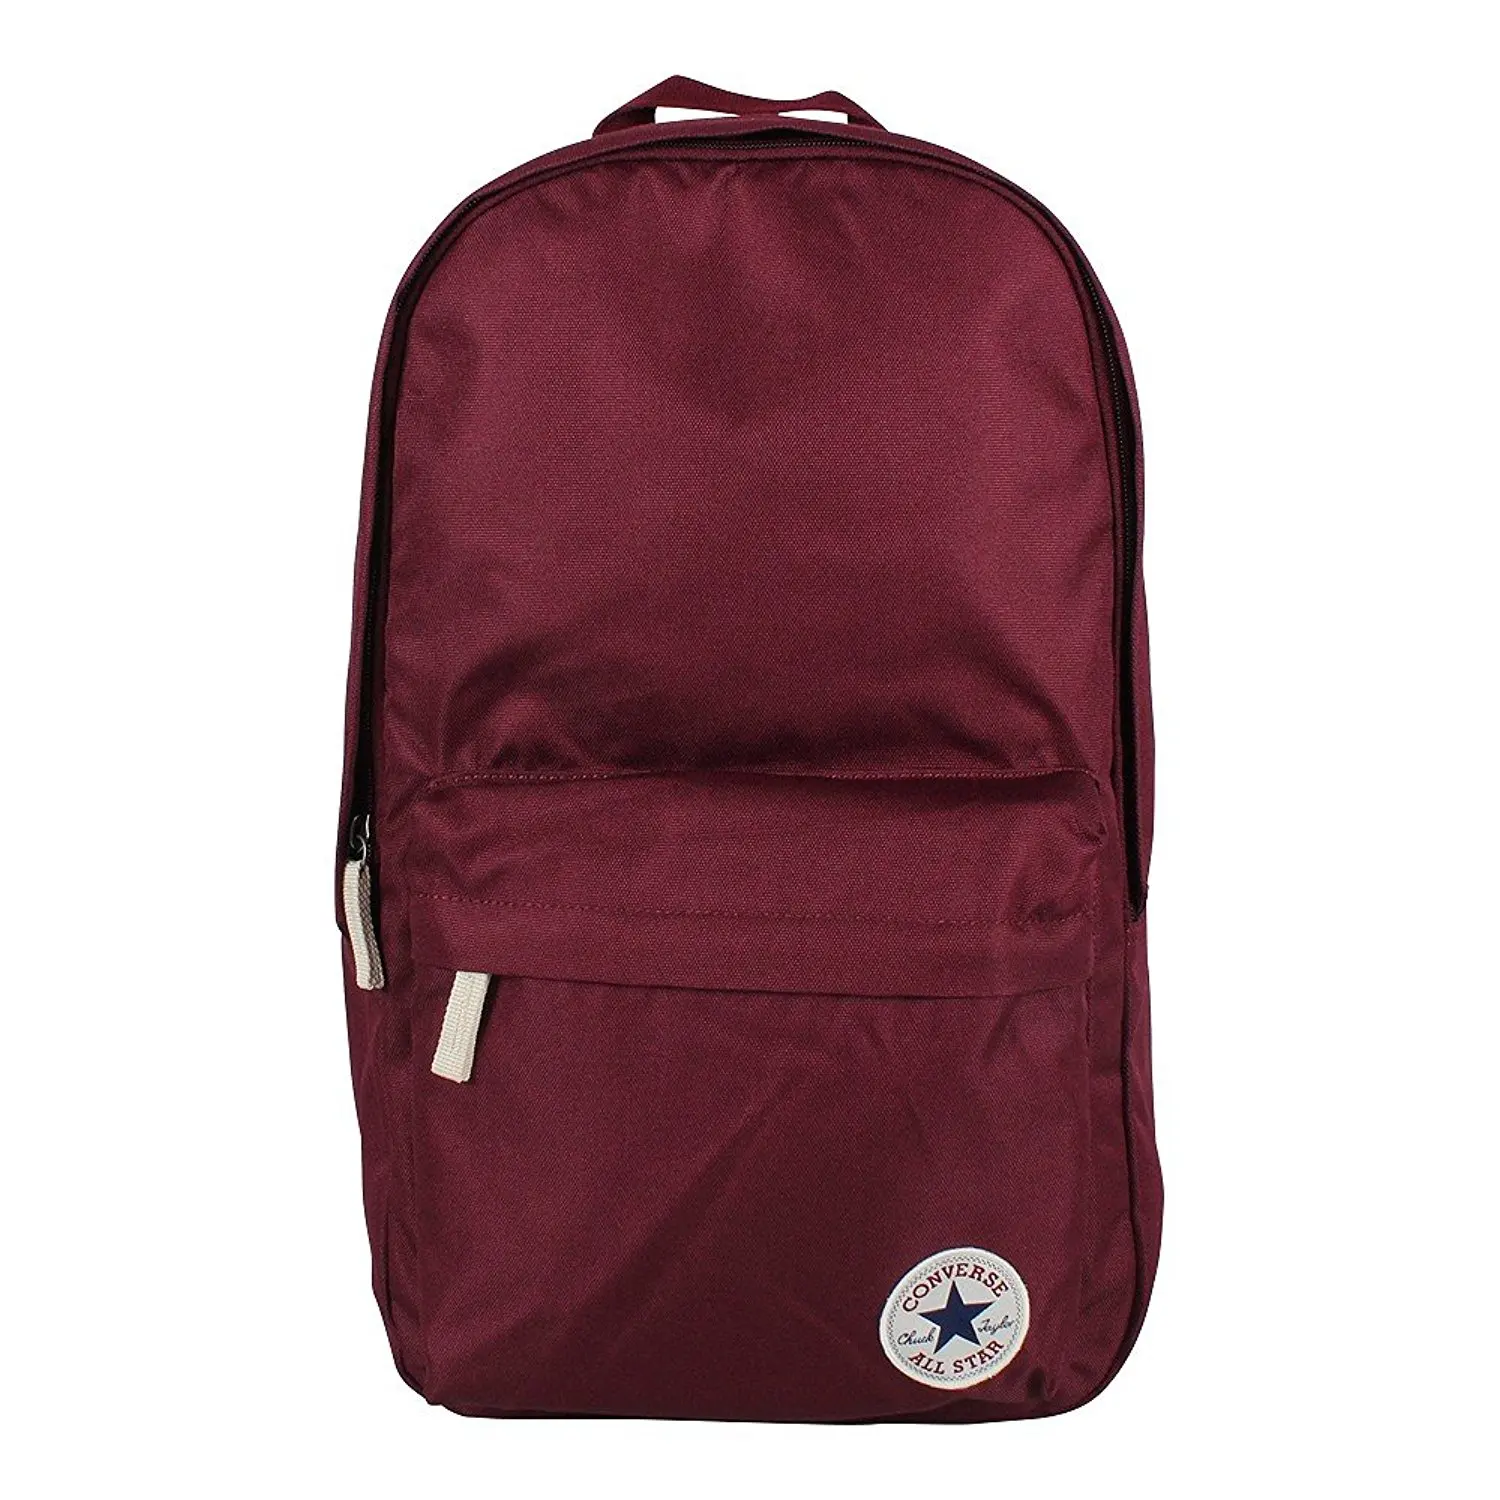 converse laptop backpack